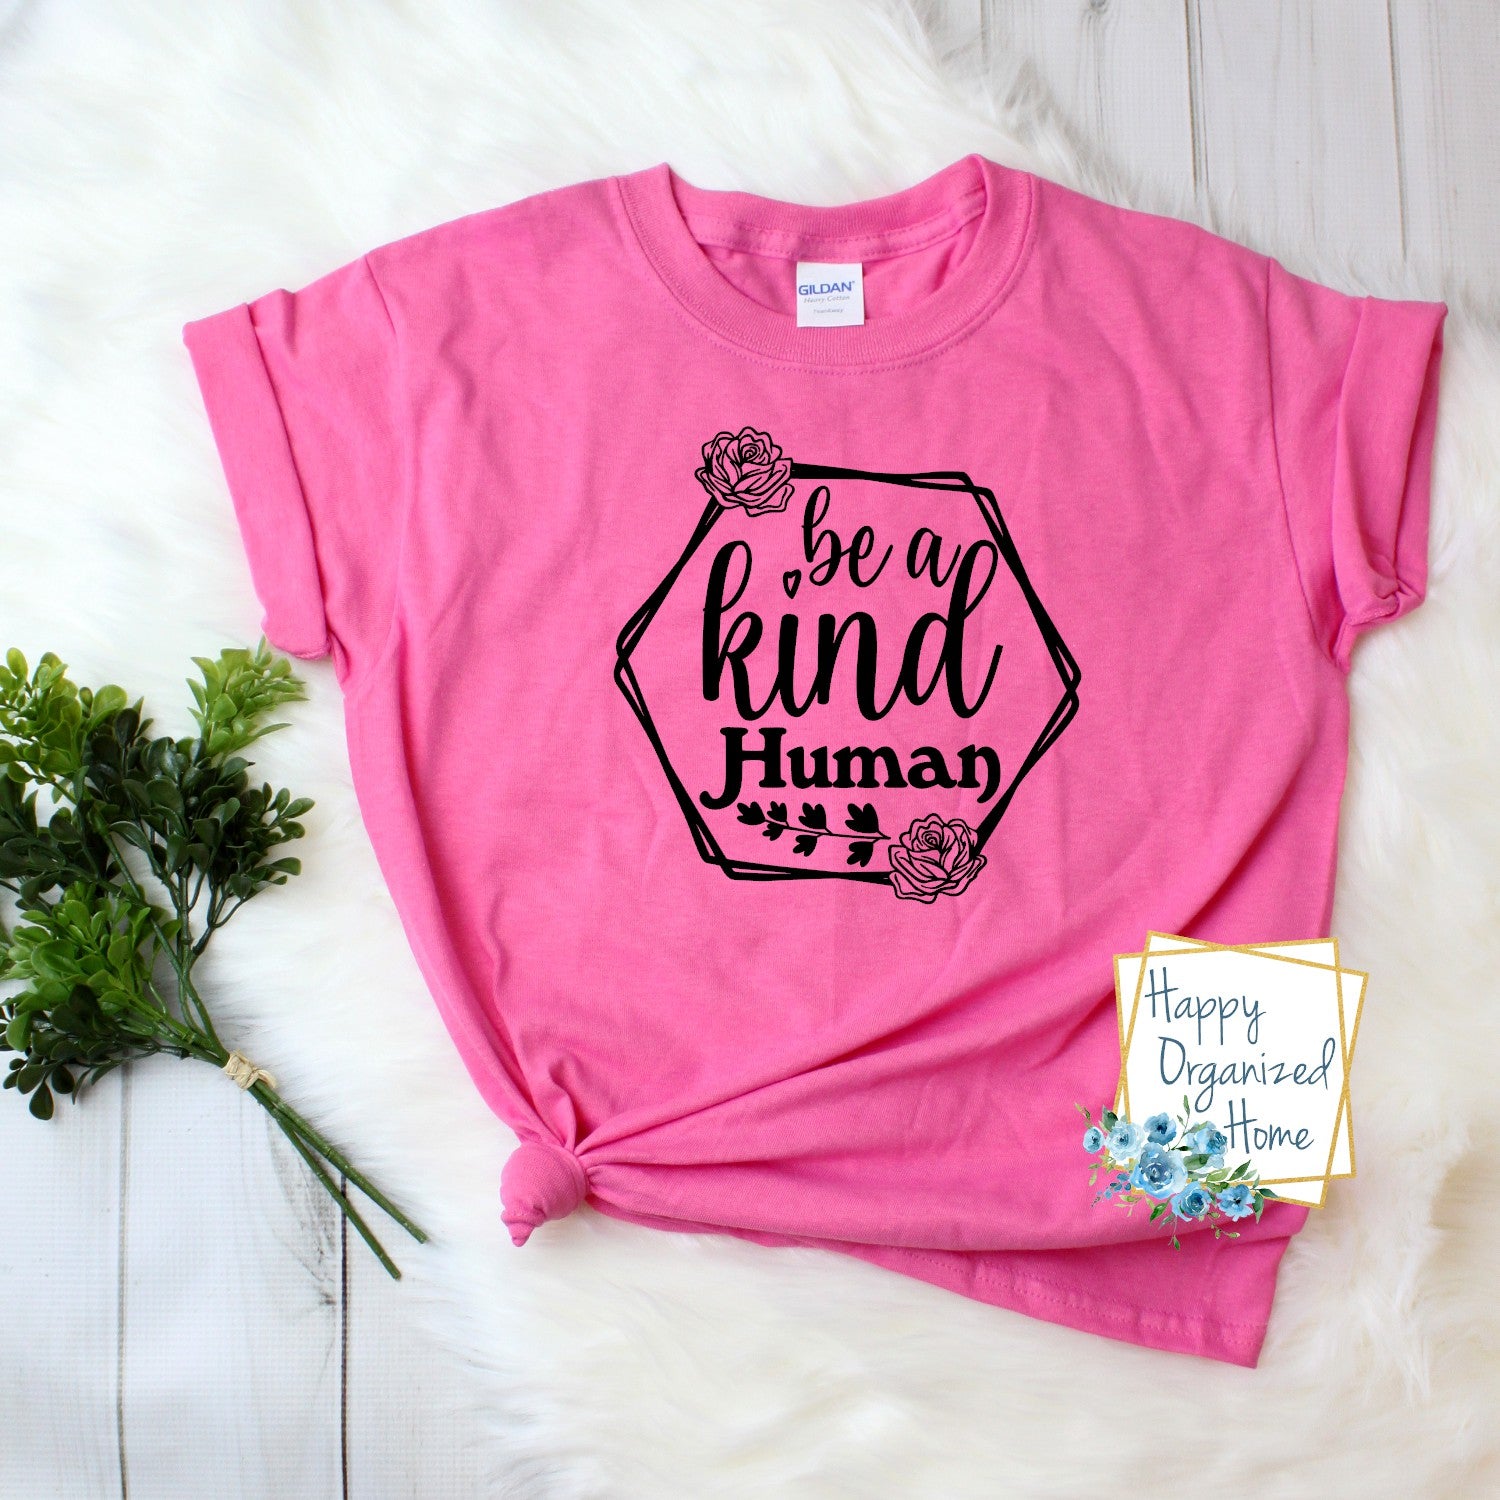 Be a Kind Human - Pink Shirt Day T-shirt Toddler, Kids and Adult